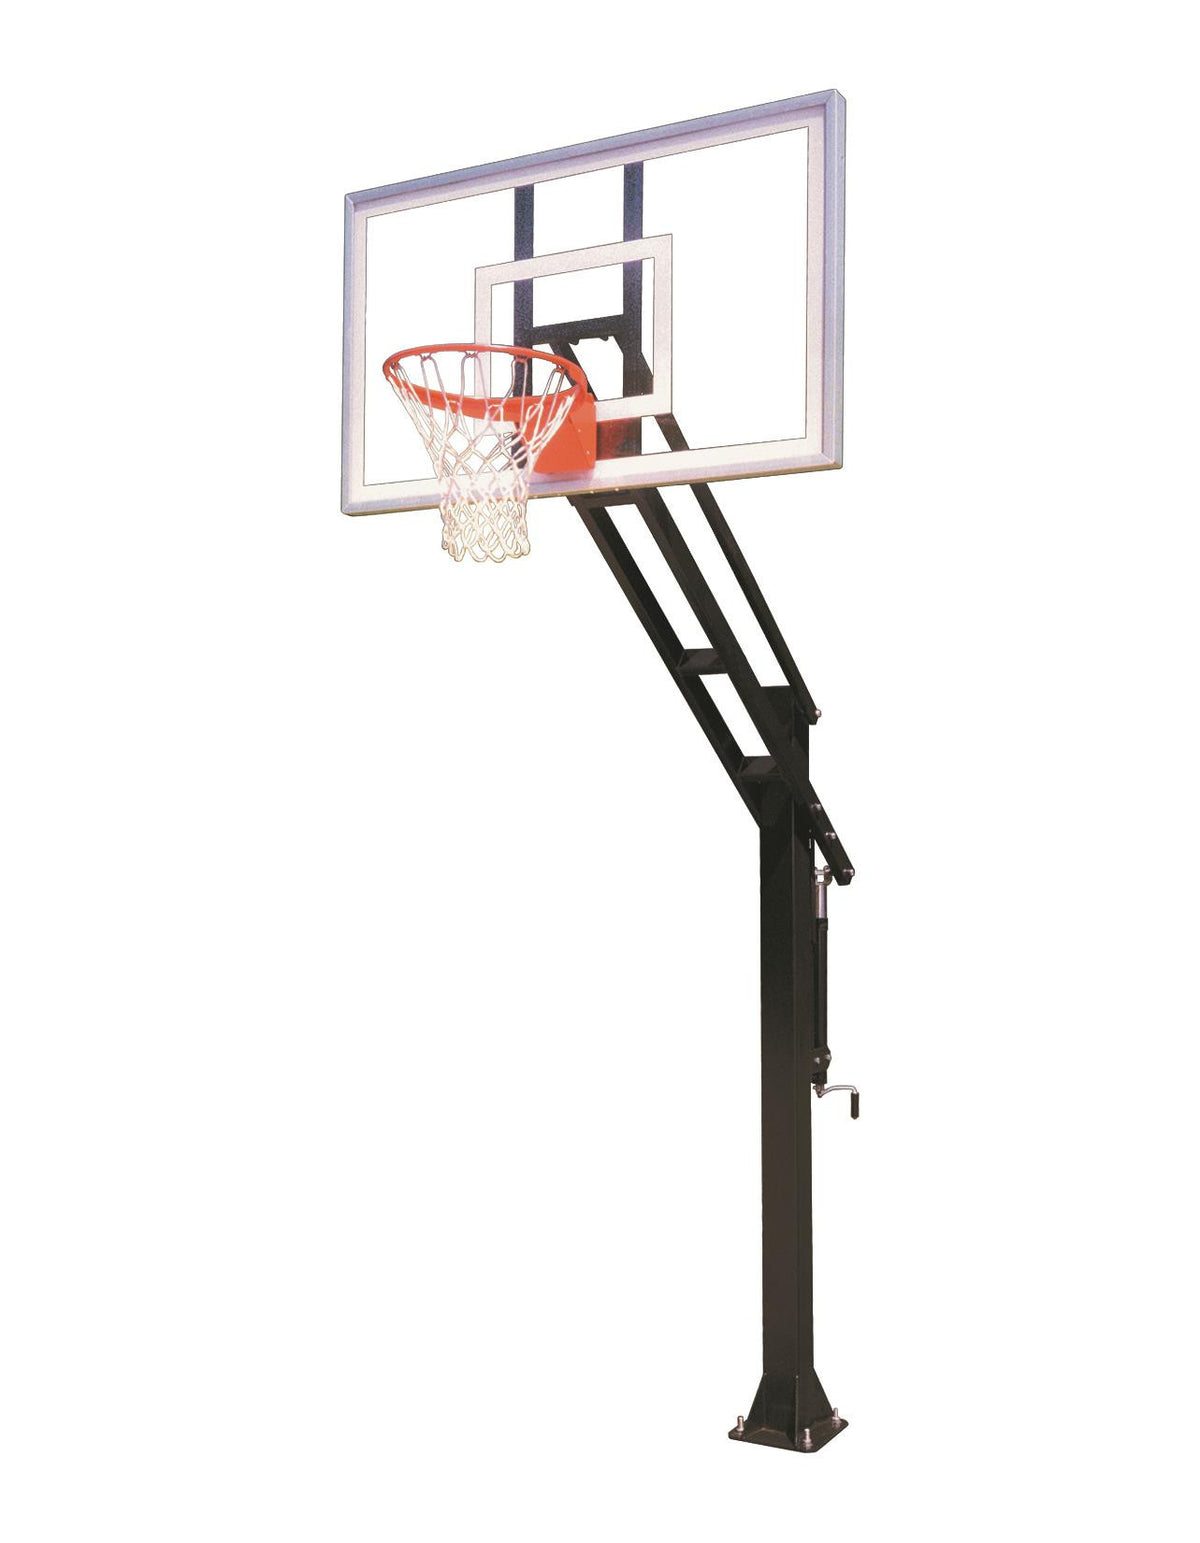 First Team Force Select In Ground Outdoor Adjustable Basketball Hoop 60 inch Acrylic